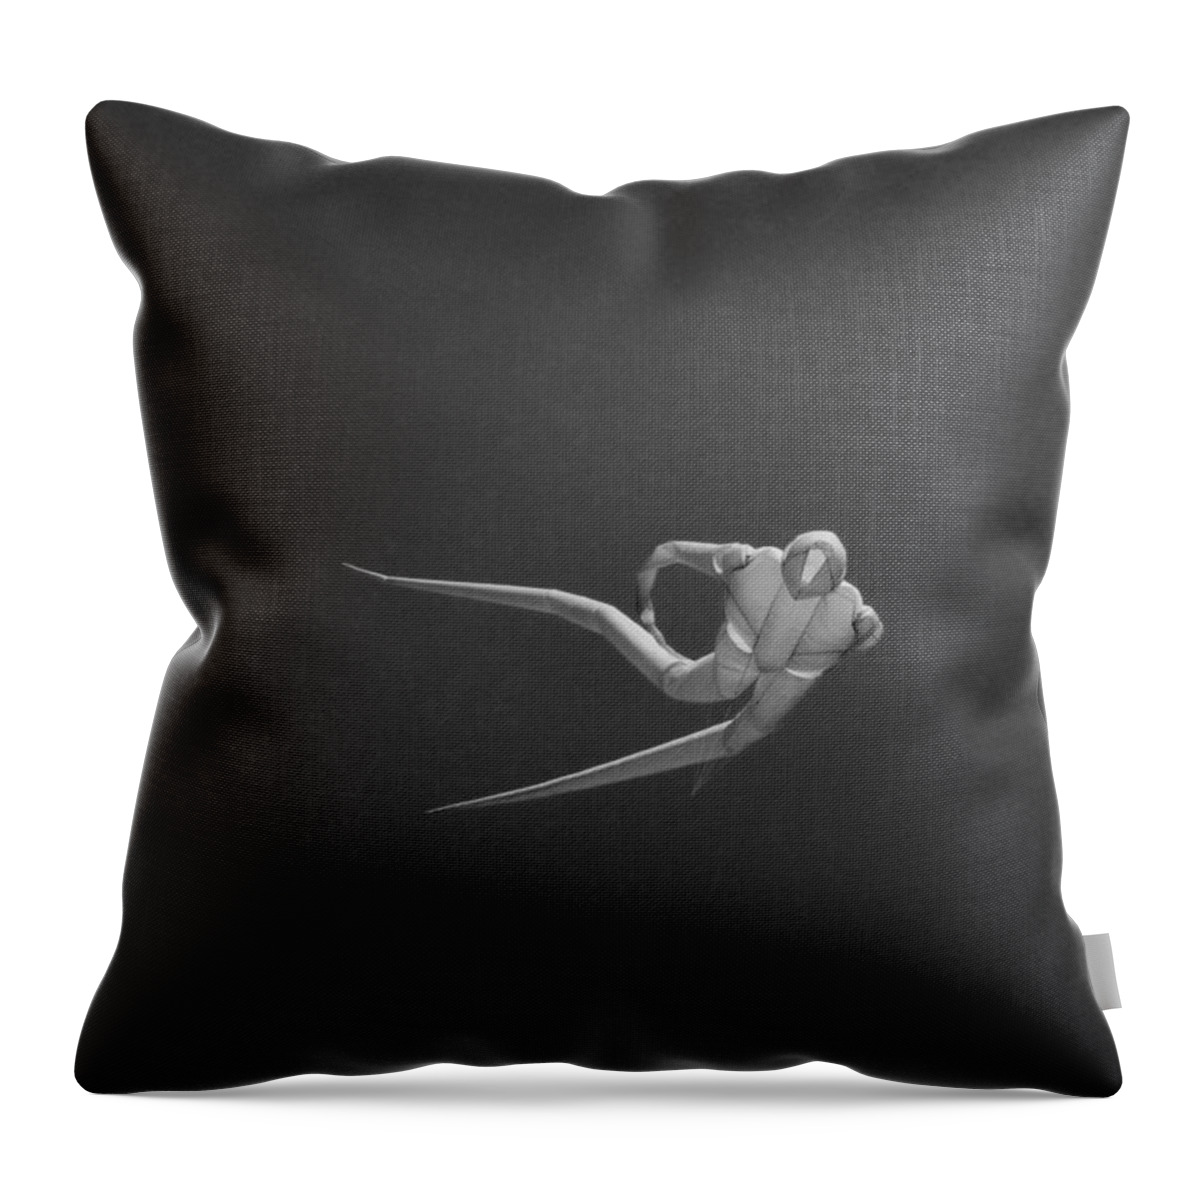 Black; Christchurch; Clouds; Flying; Kite; Kite Day; New Zealand; Nz; South Island; New Brighton; Spaceman; Spacesuit; Sci-fi; Space Throw Pillow featuring the photograph Save the Last Dance For Me by Steve Taylor